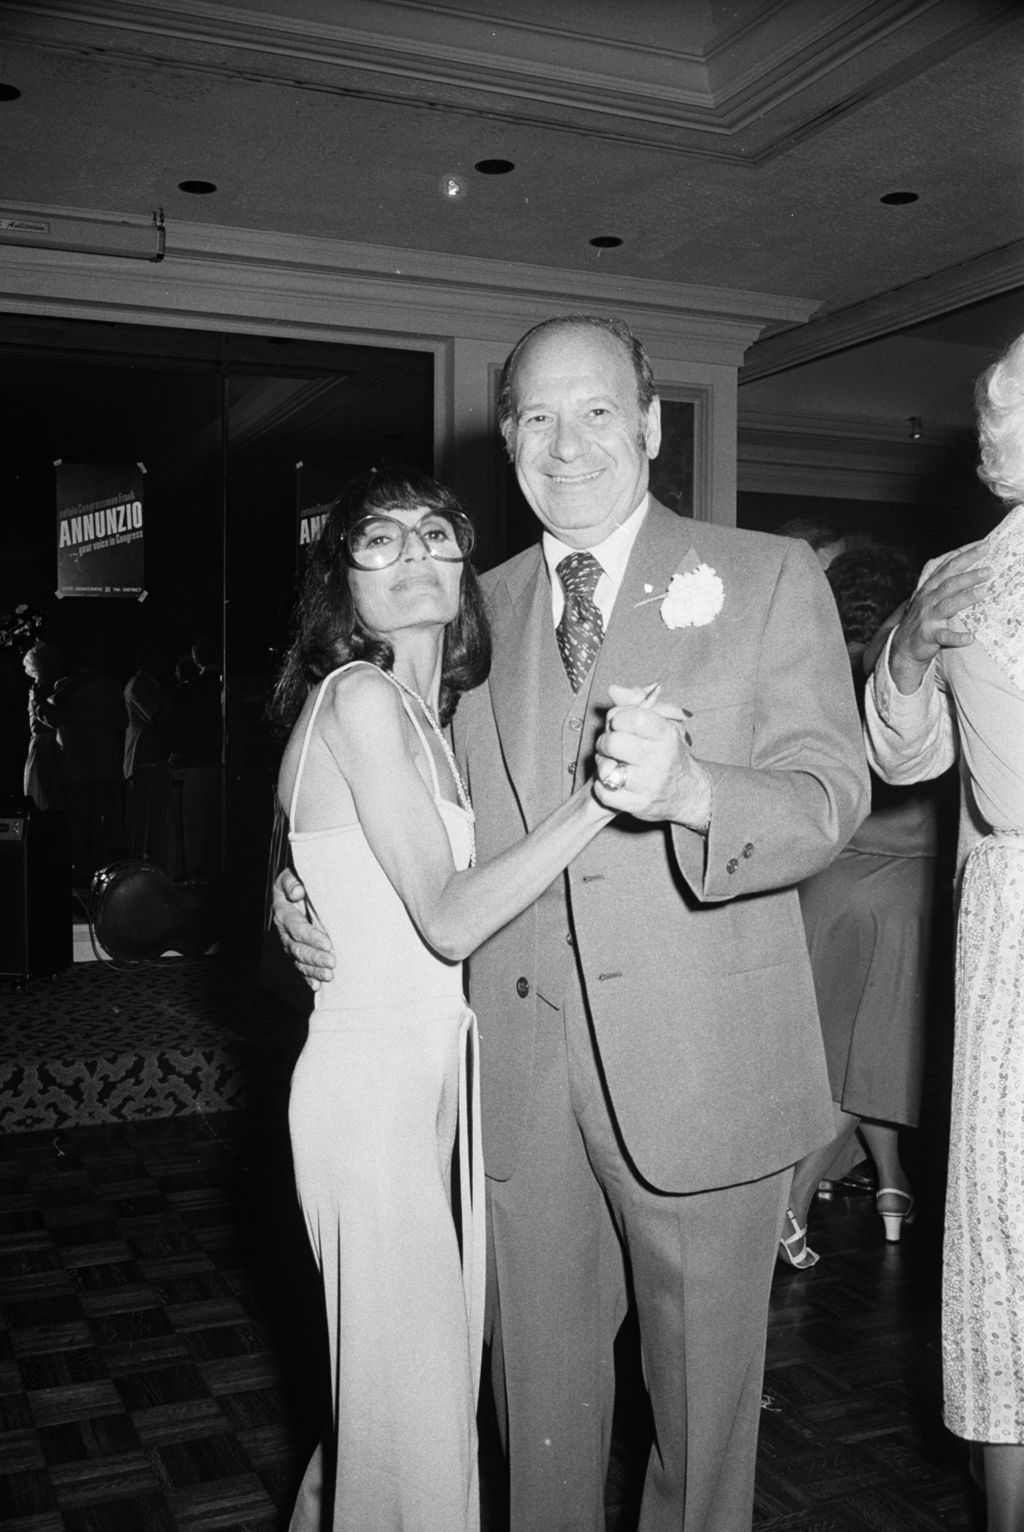 Congressman Frank Annunzio dancing with his daughter